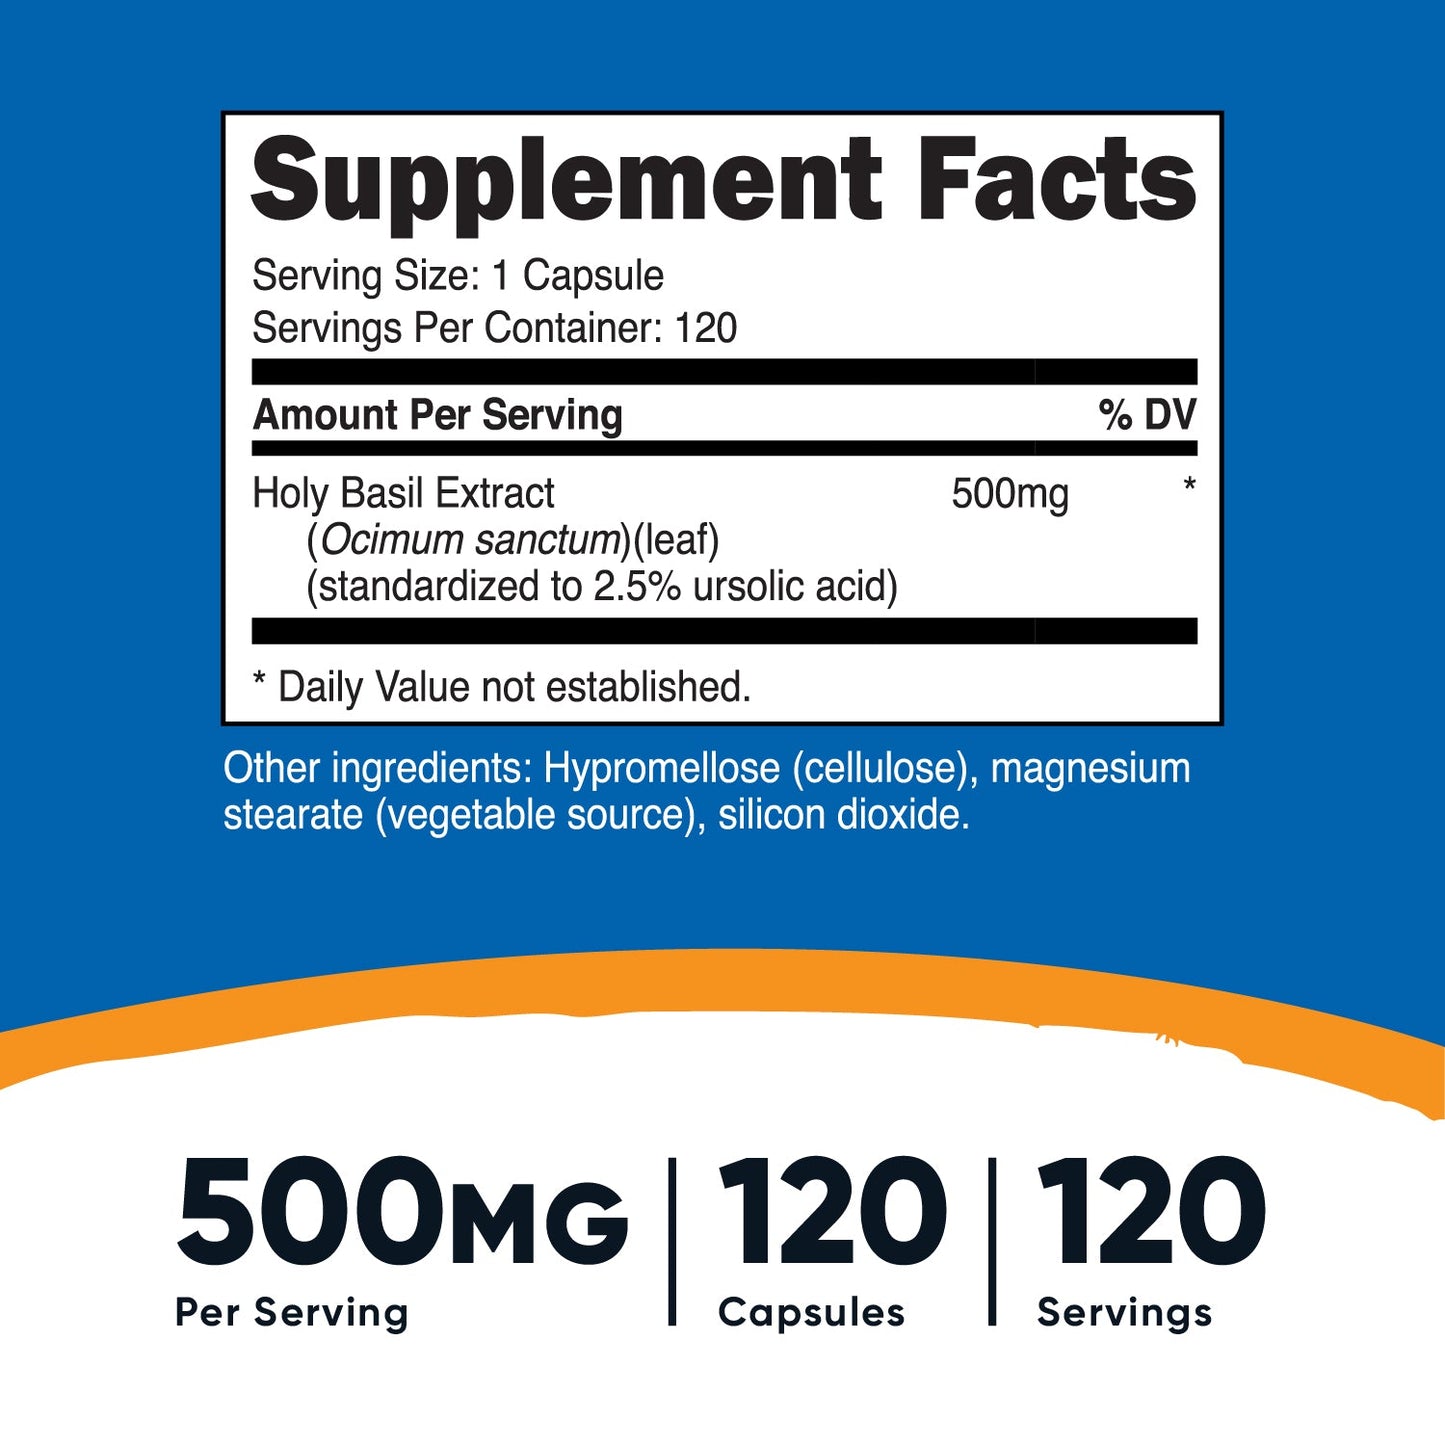 Nutricost Holy Basil Capsules